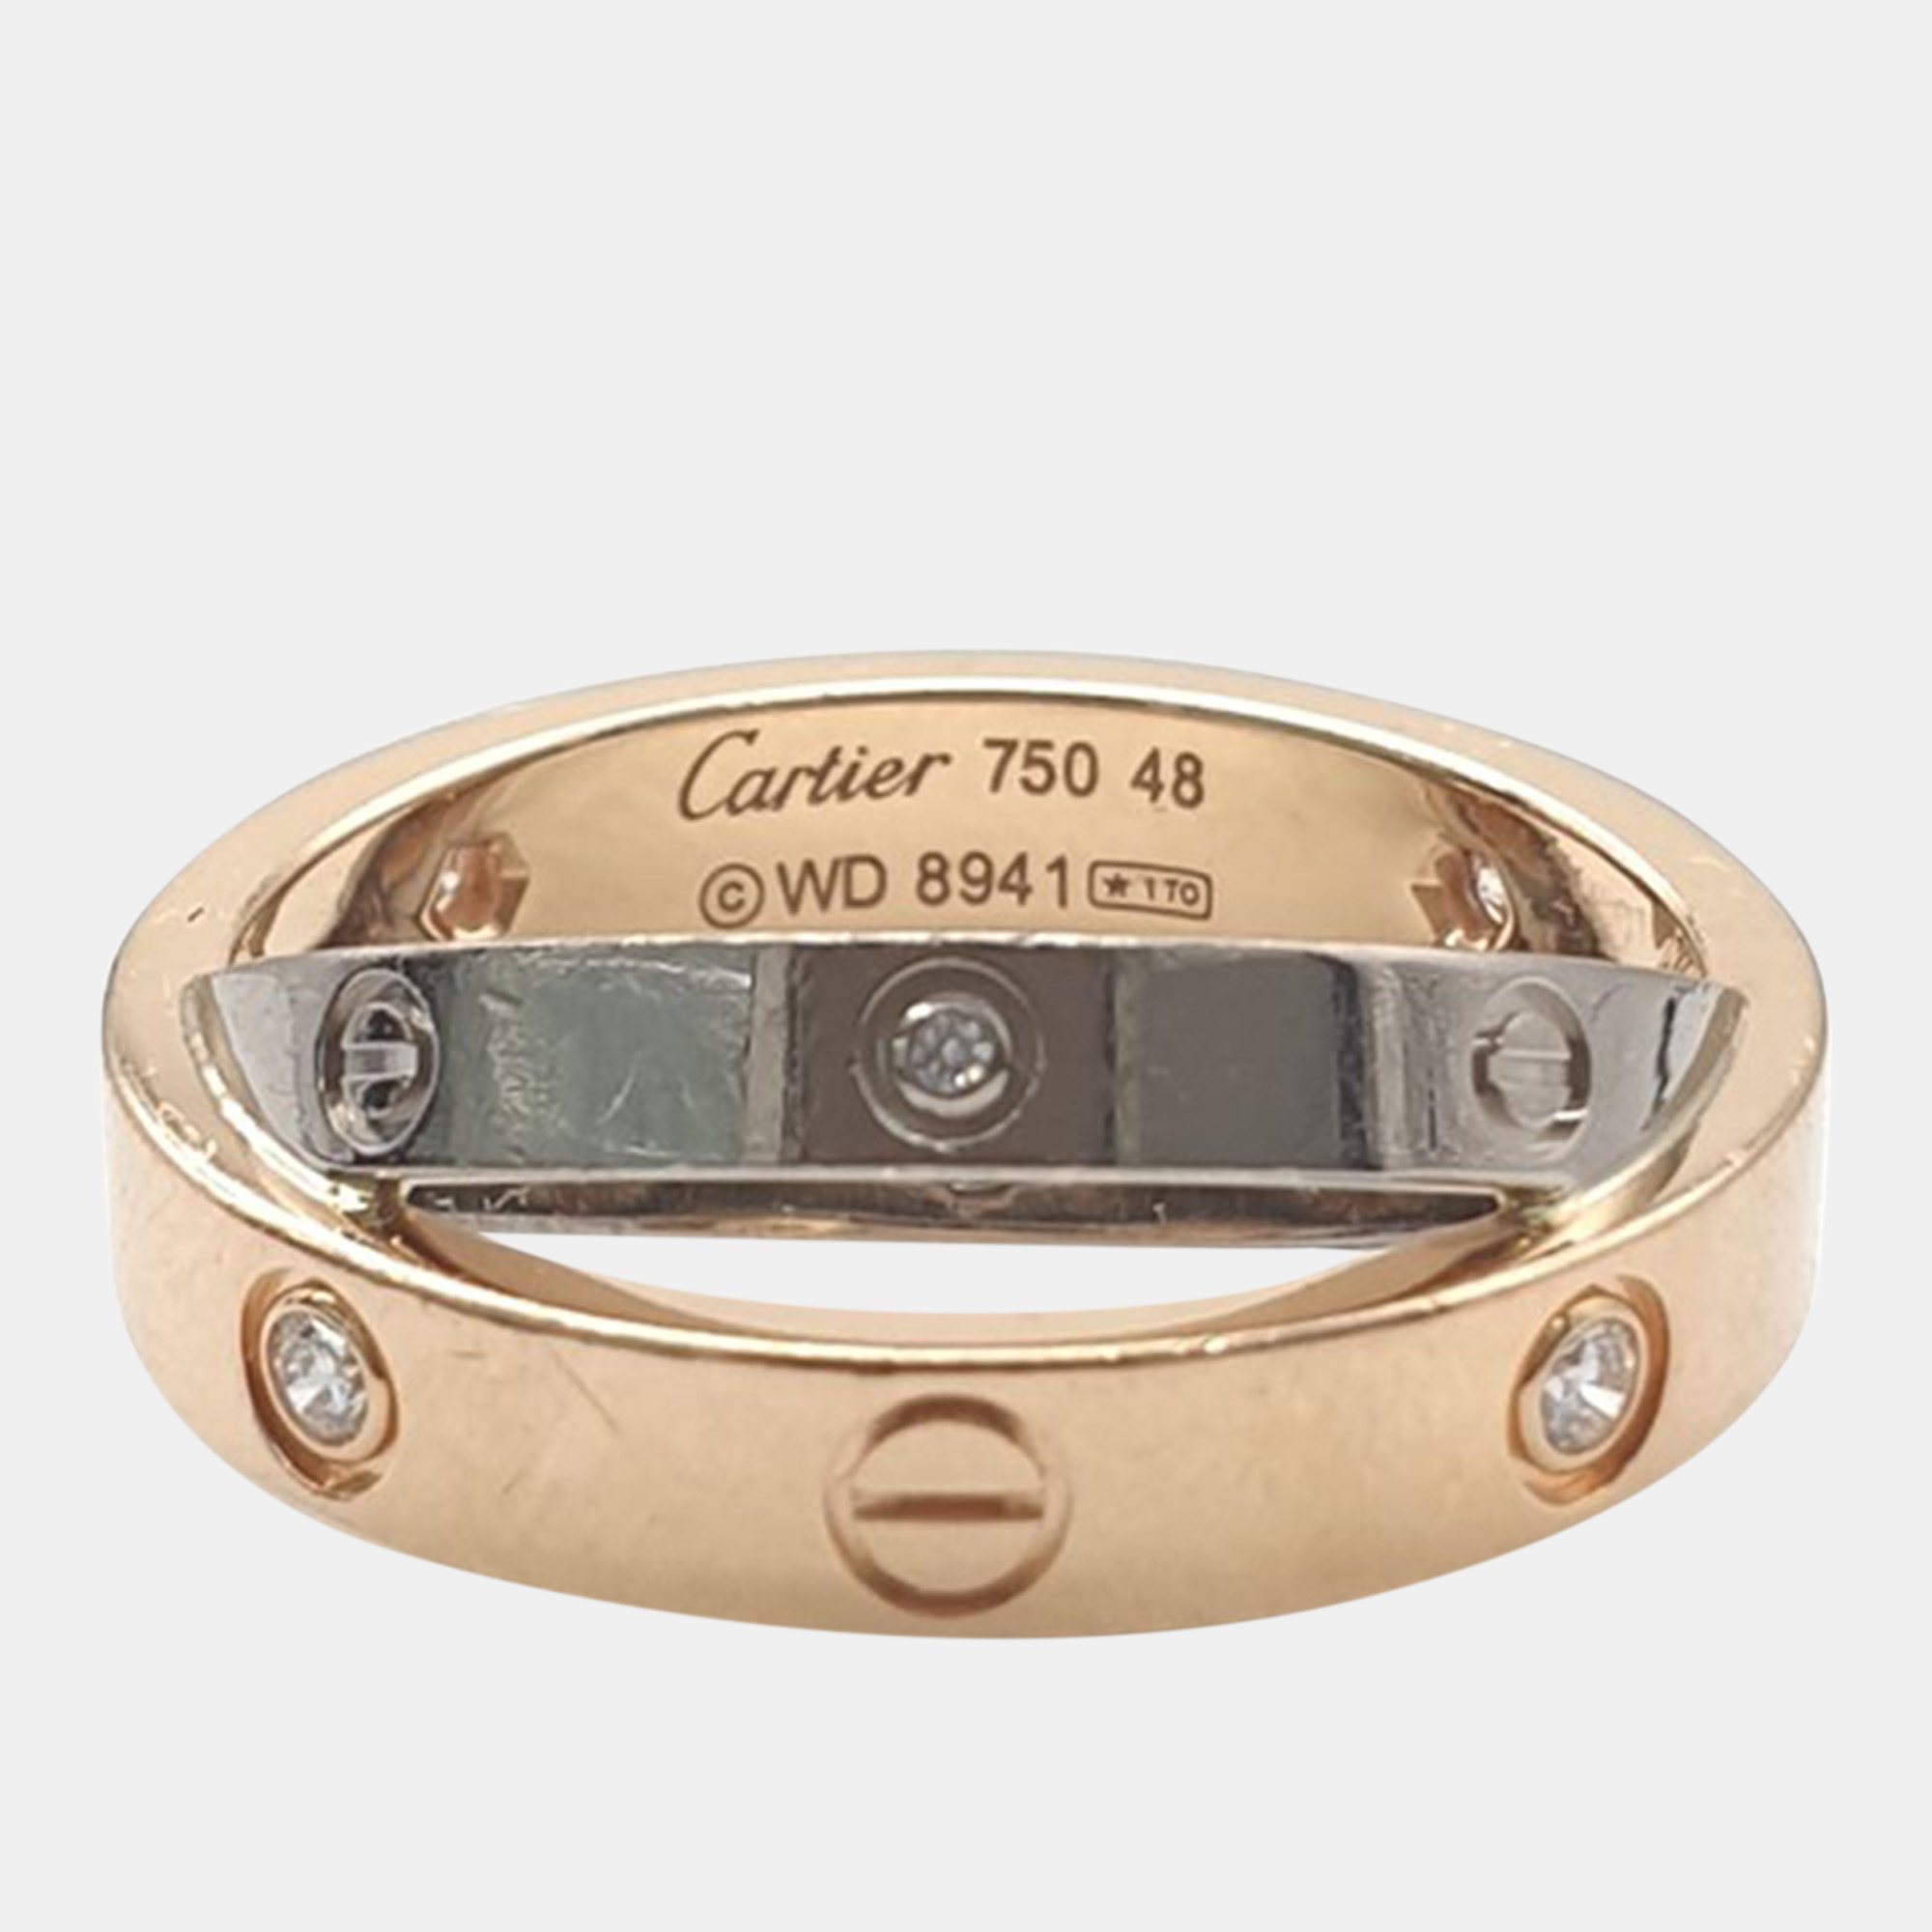 Cartier 18k white gold, rose gold and diamond half love band ring eu 48